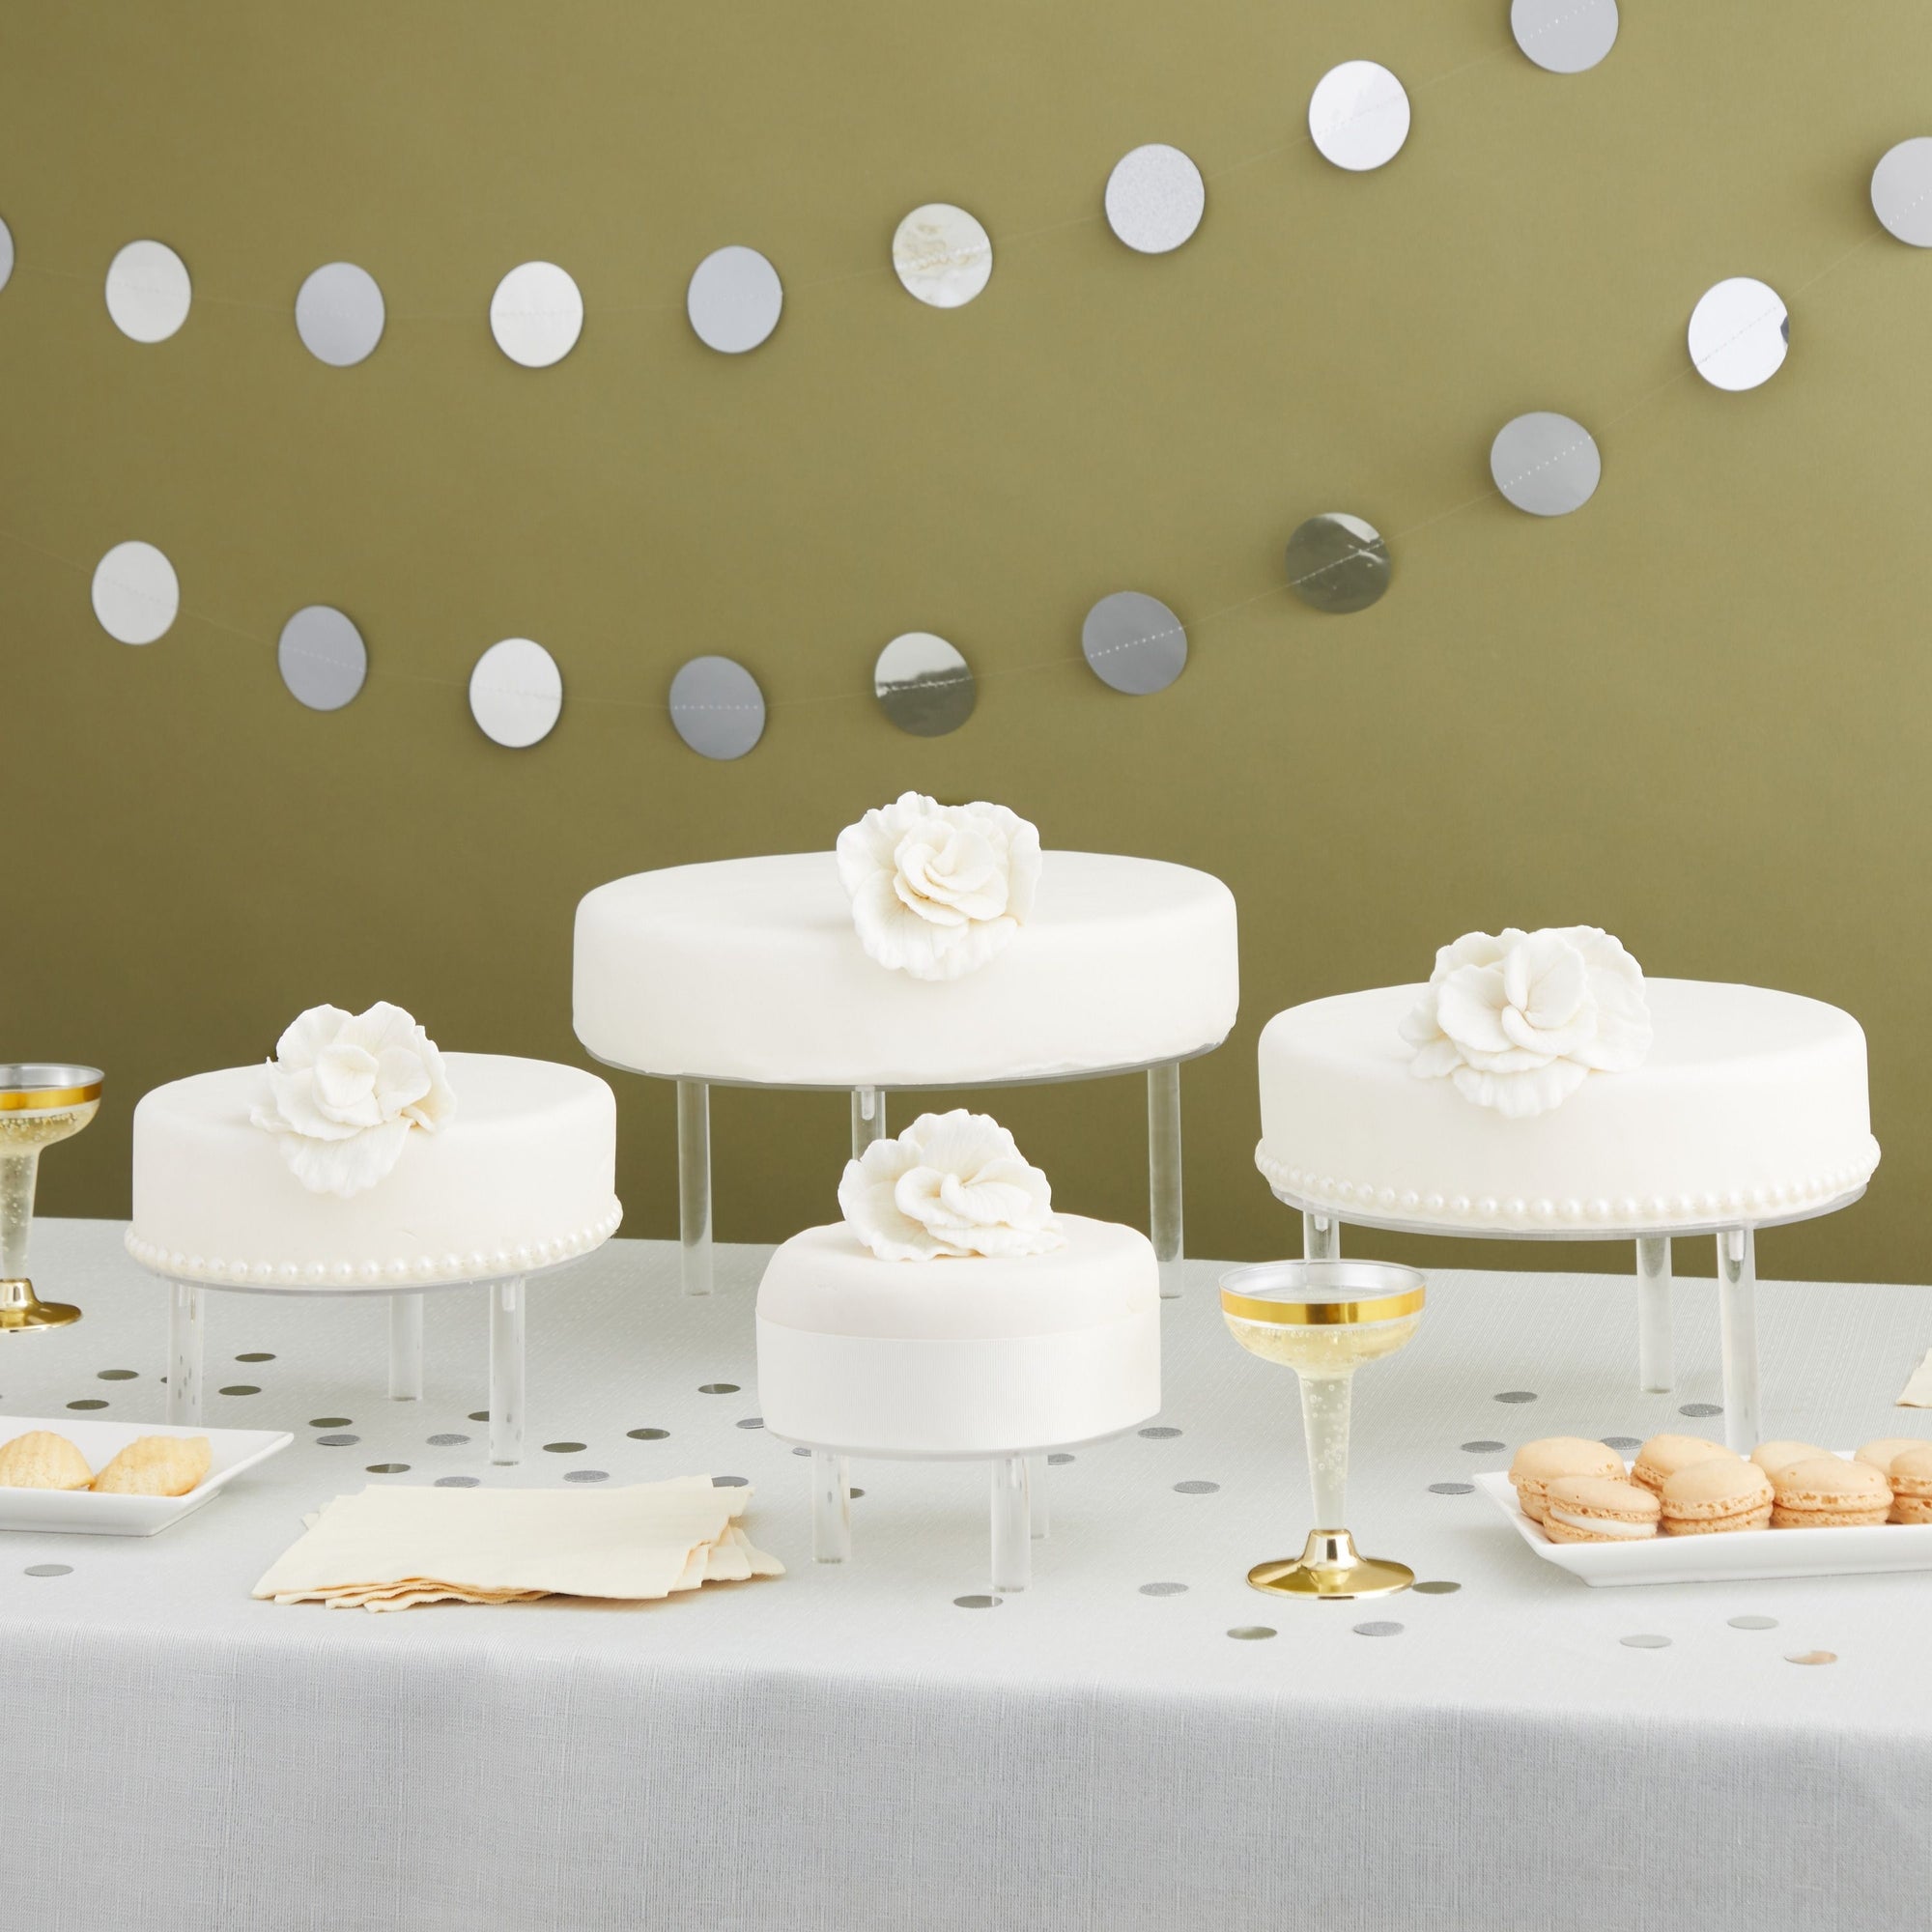 3 Piece Round Foam Cake Dummy Set for Decorating, Faux Cake in 3 Sizes for  Birthday, Wedding Display (10.8 Inches Tall)